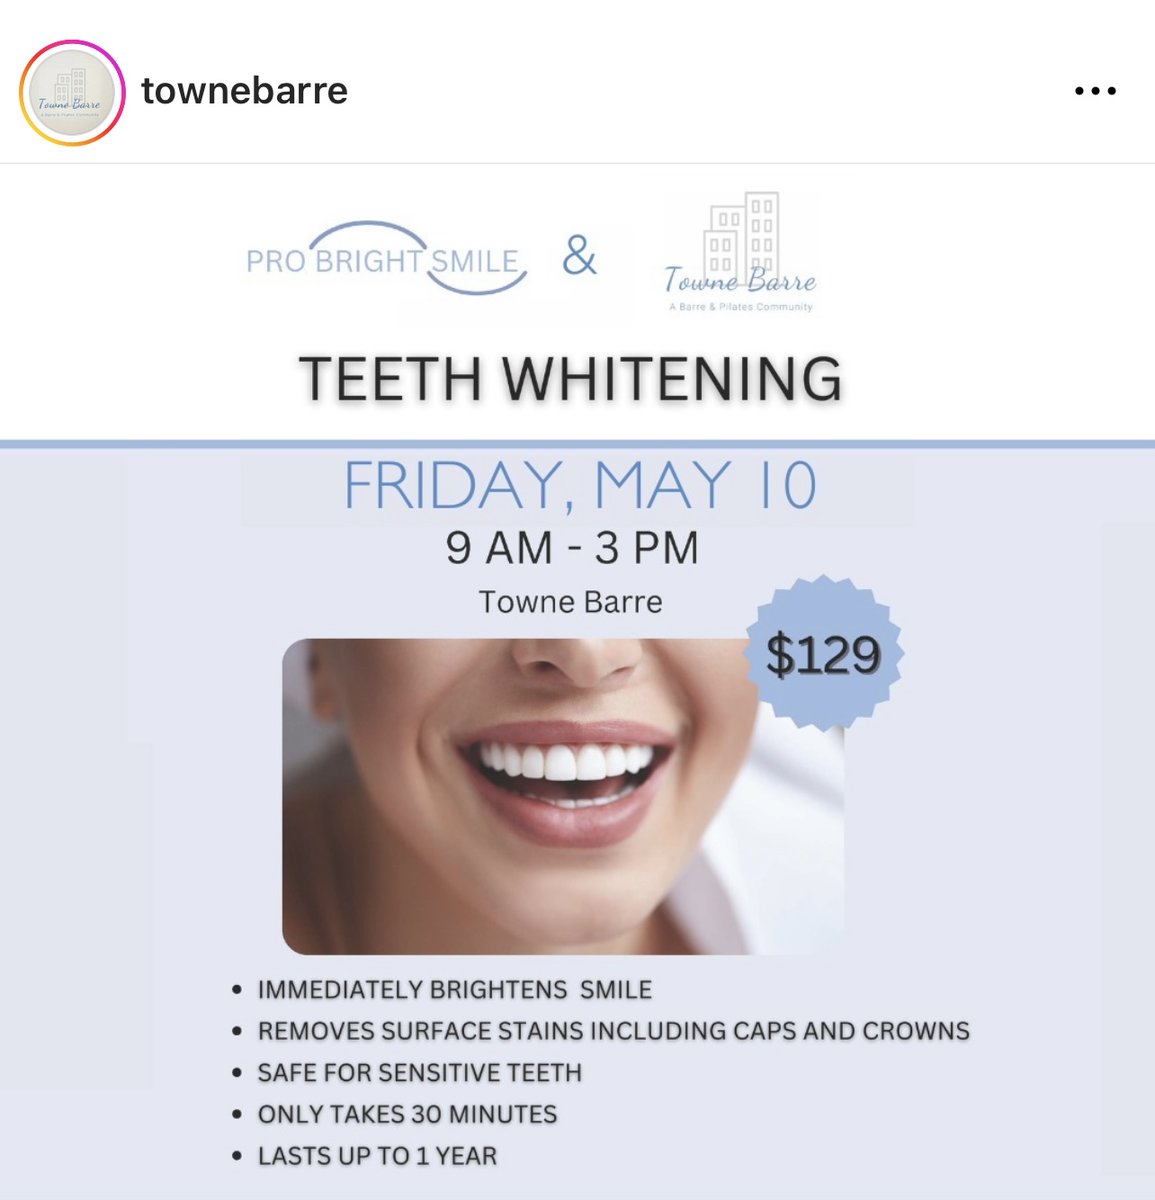 #Barre & #teethwhitening ... Yes please!!! 
Pro Bright Smile & Towne Barre joining forces😄

Go to probrightsmile.com to register today

#DulaneyPlaza #Community #Shoplocal #Supportlocal #Smile #Wellness #Healthylifestyle #Lookgoodfeelgood #Smilebright